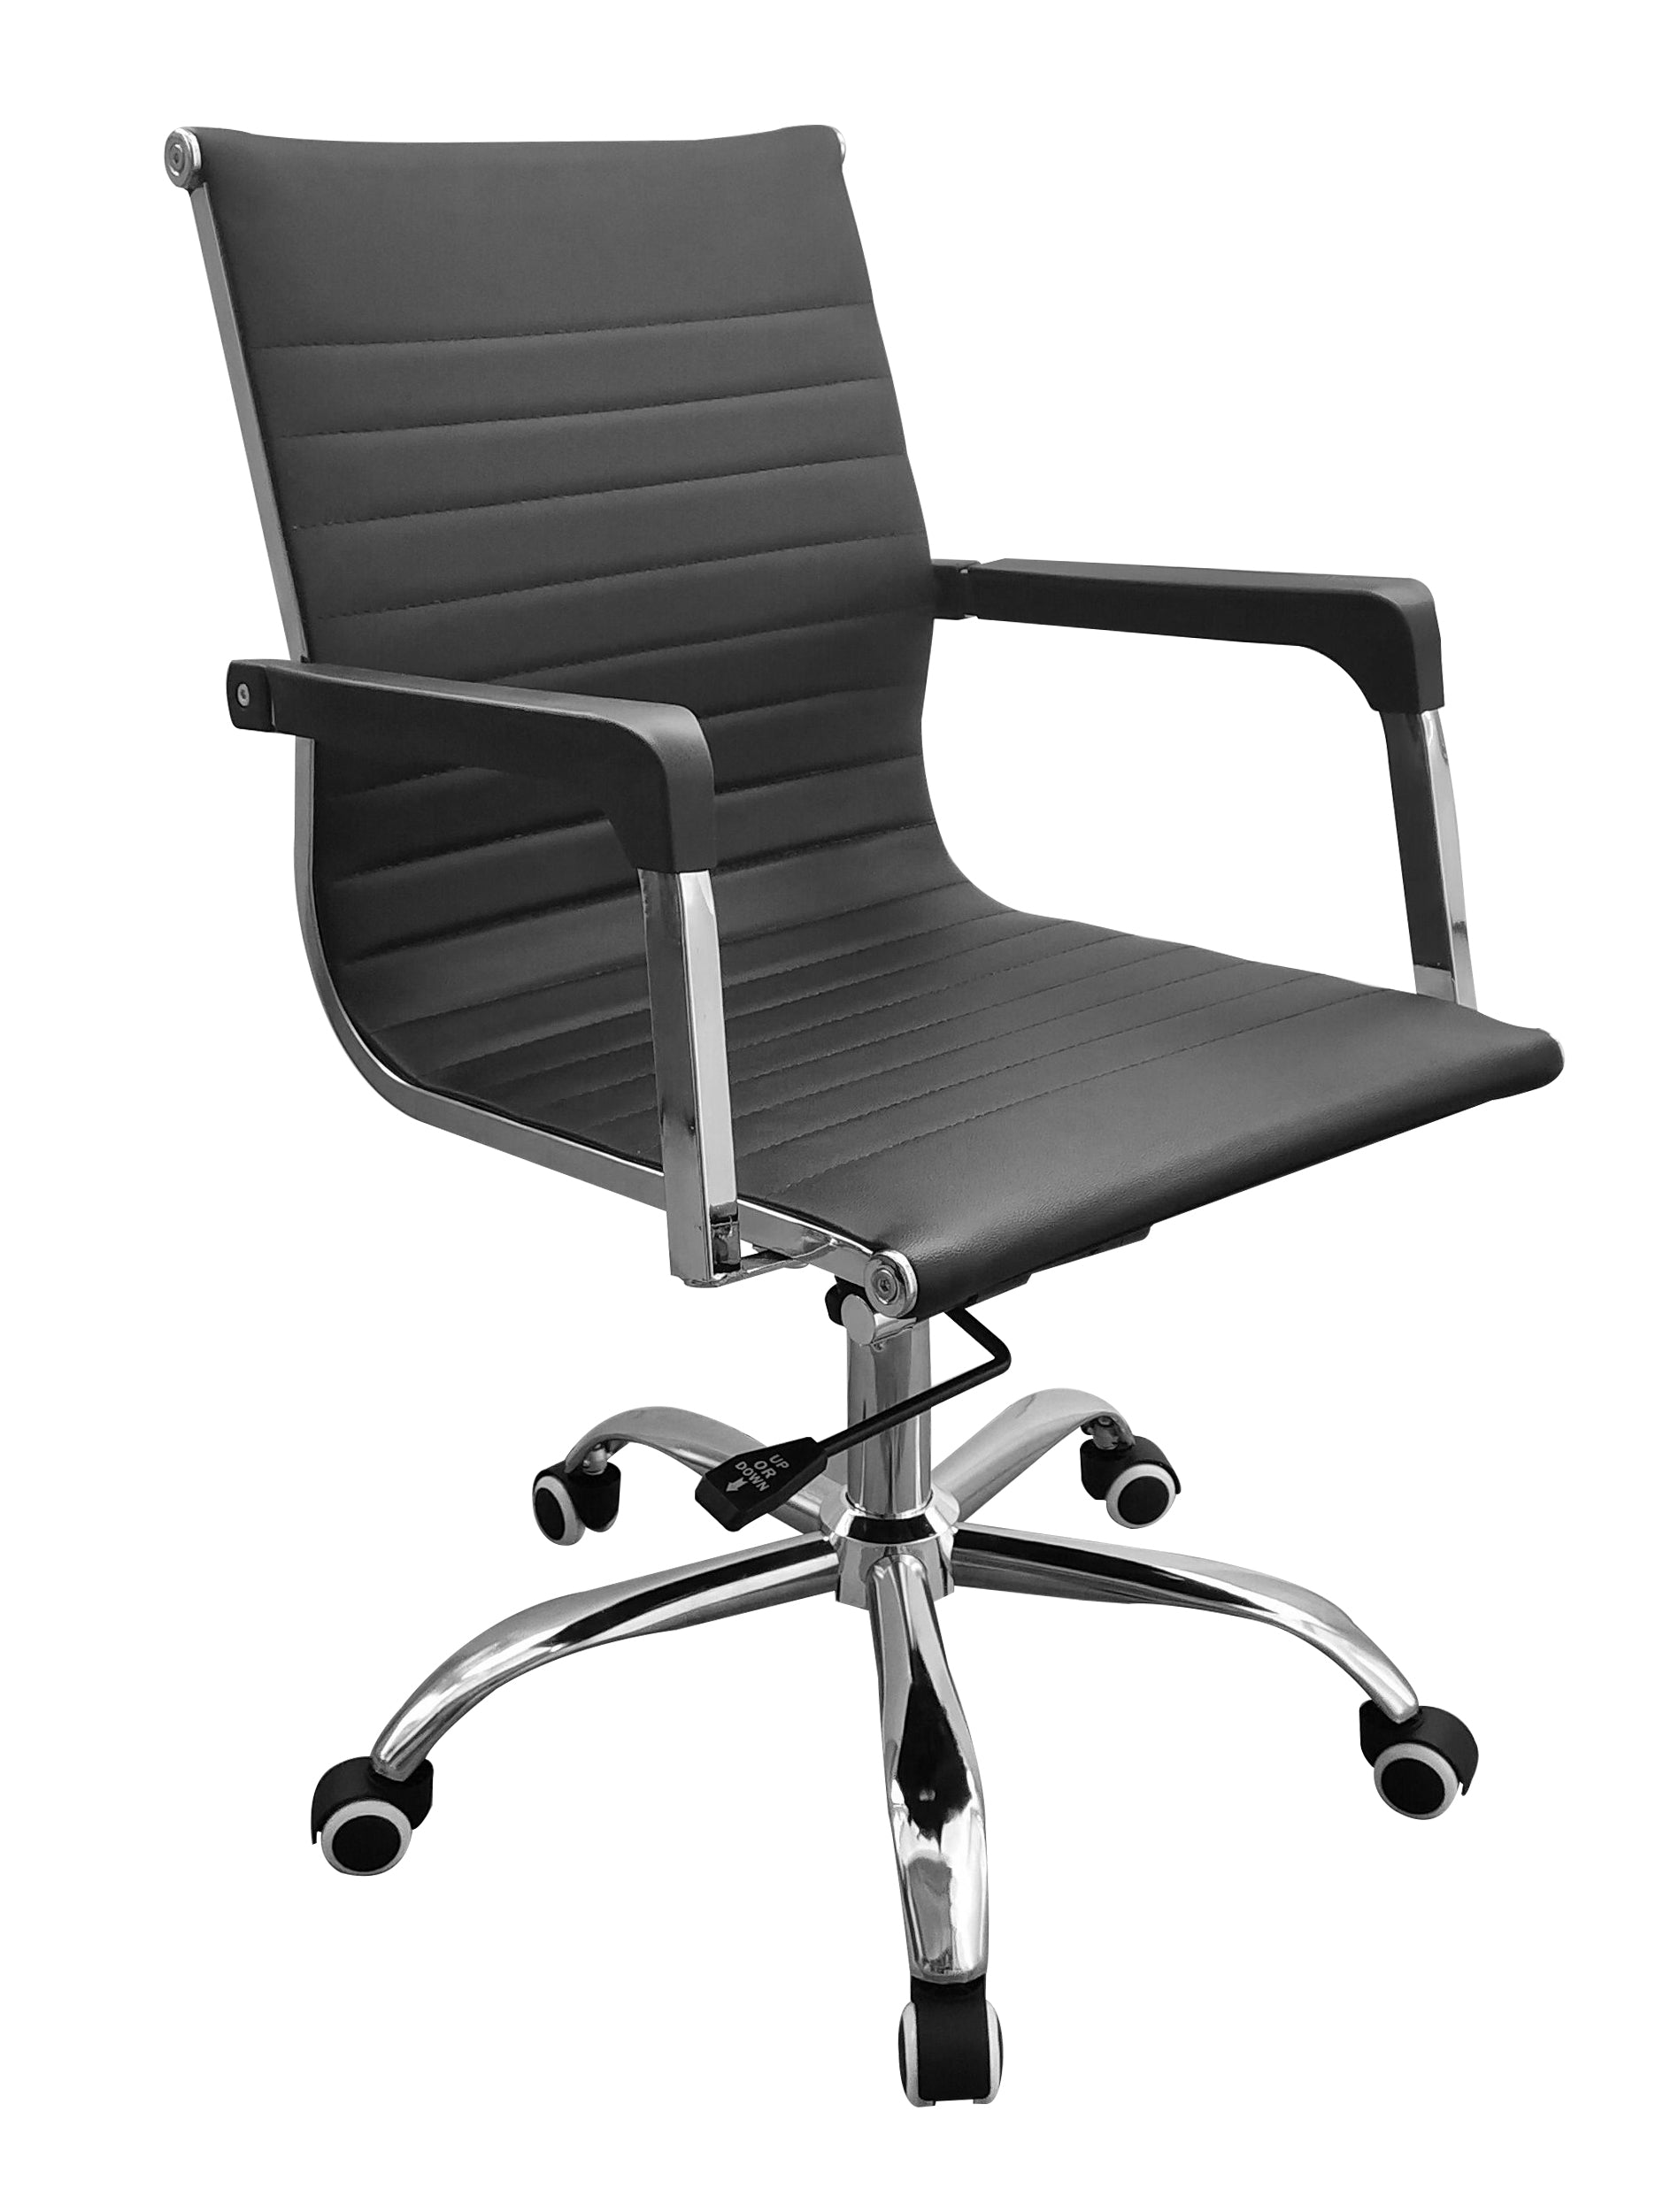 Home Office Chair With Contour Back In Black Faux Leather With Chrome Base